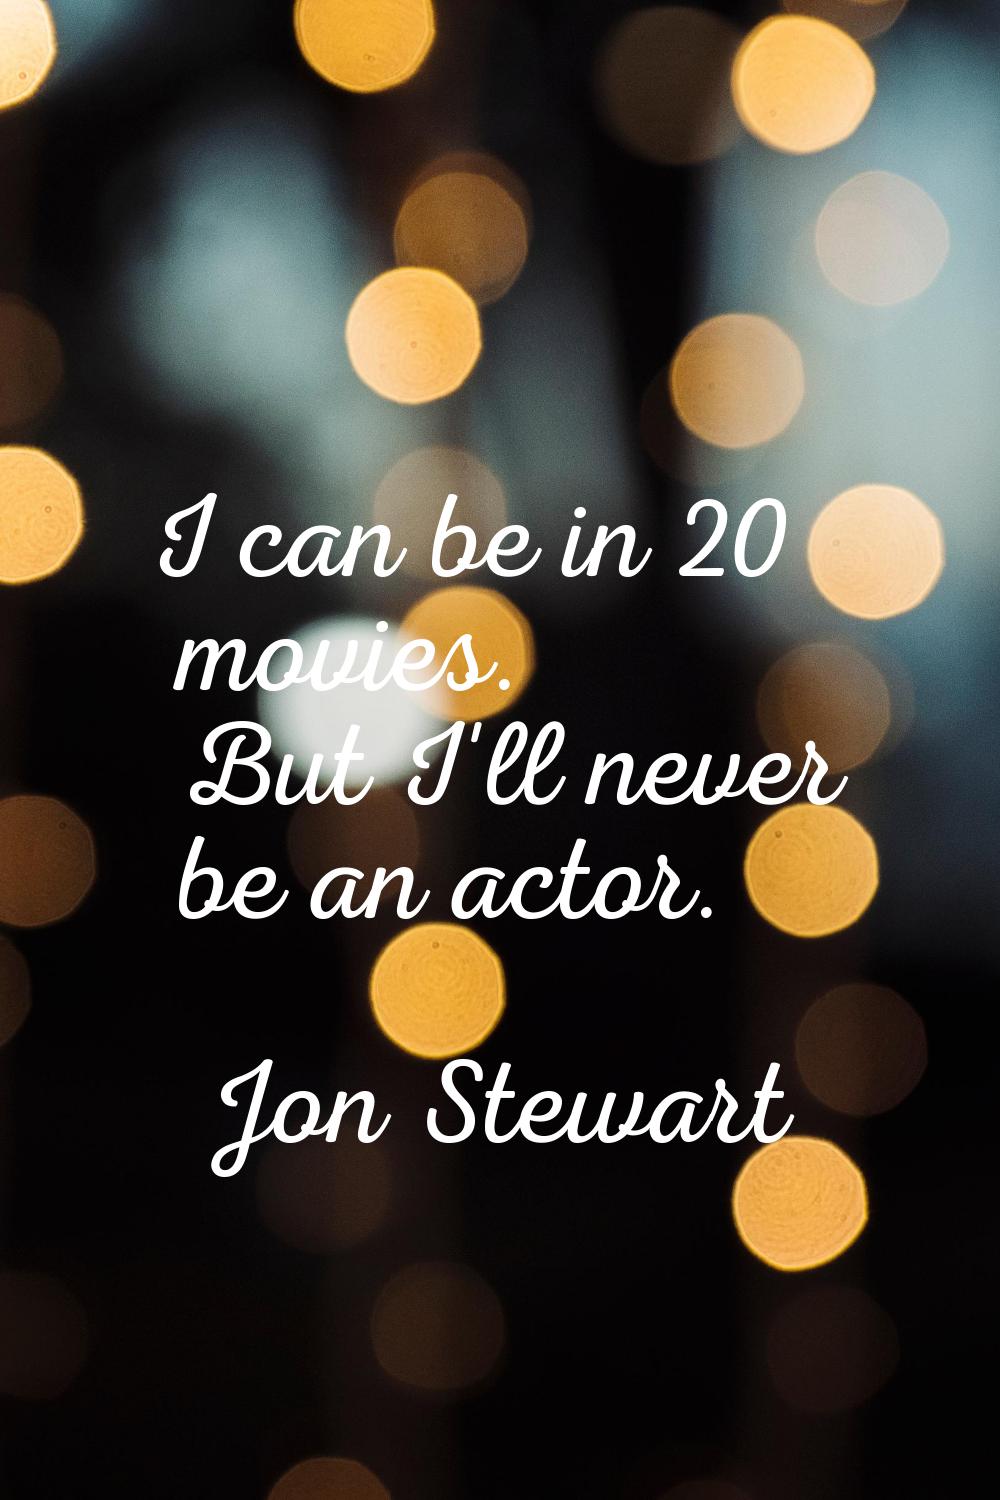 I can be in 20 movies. But I'll never be an actor.